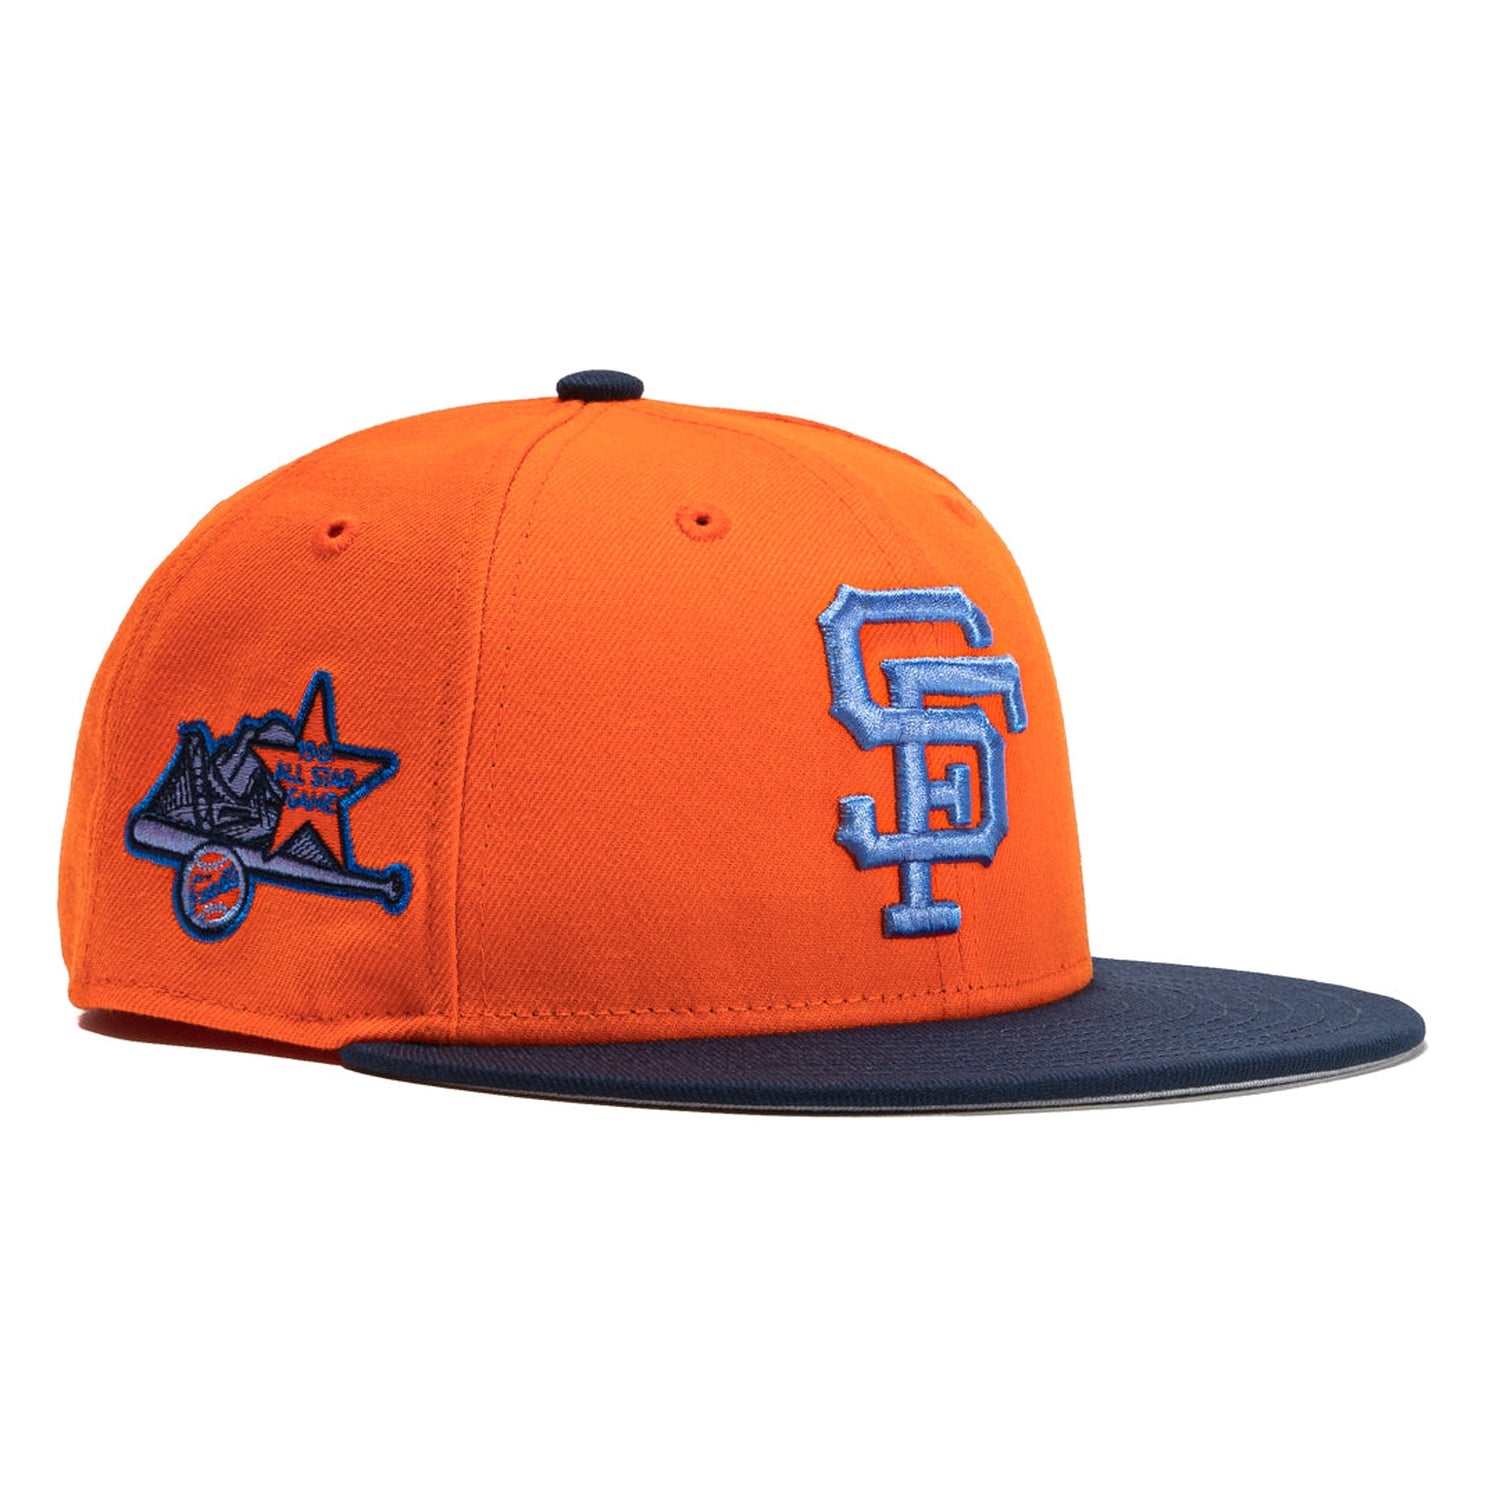 TUCSON PADRES NAVY EDITION 59FIFTY now available from